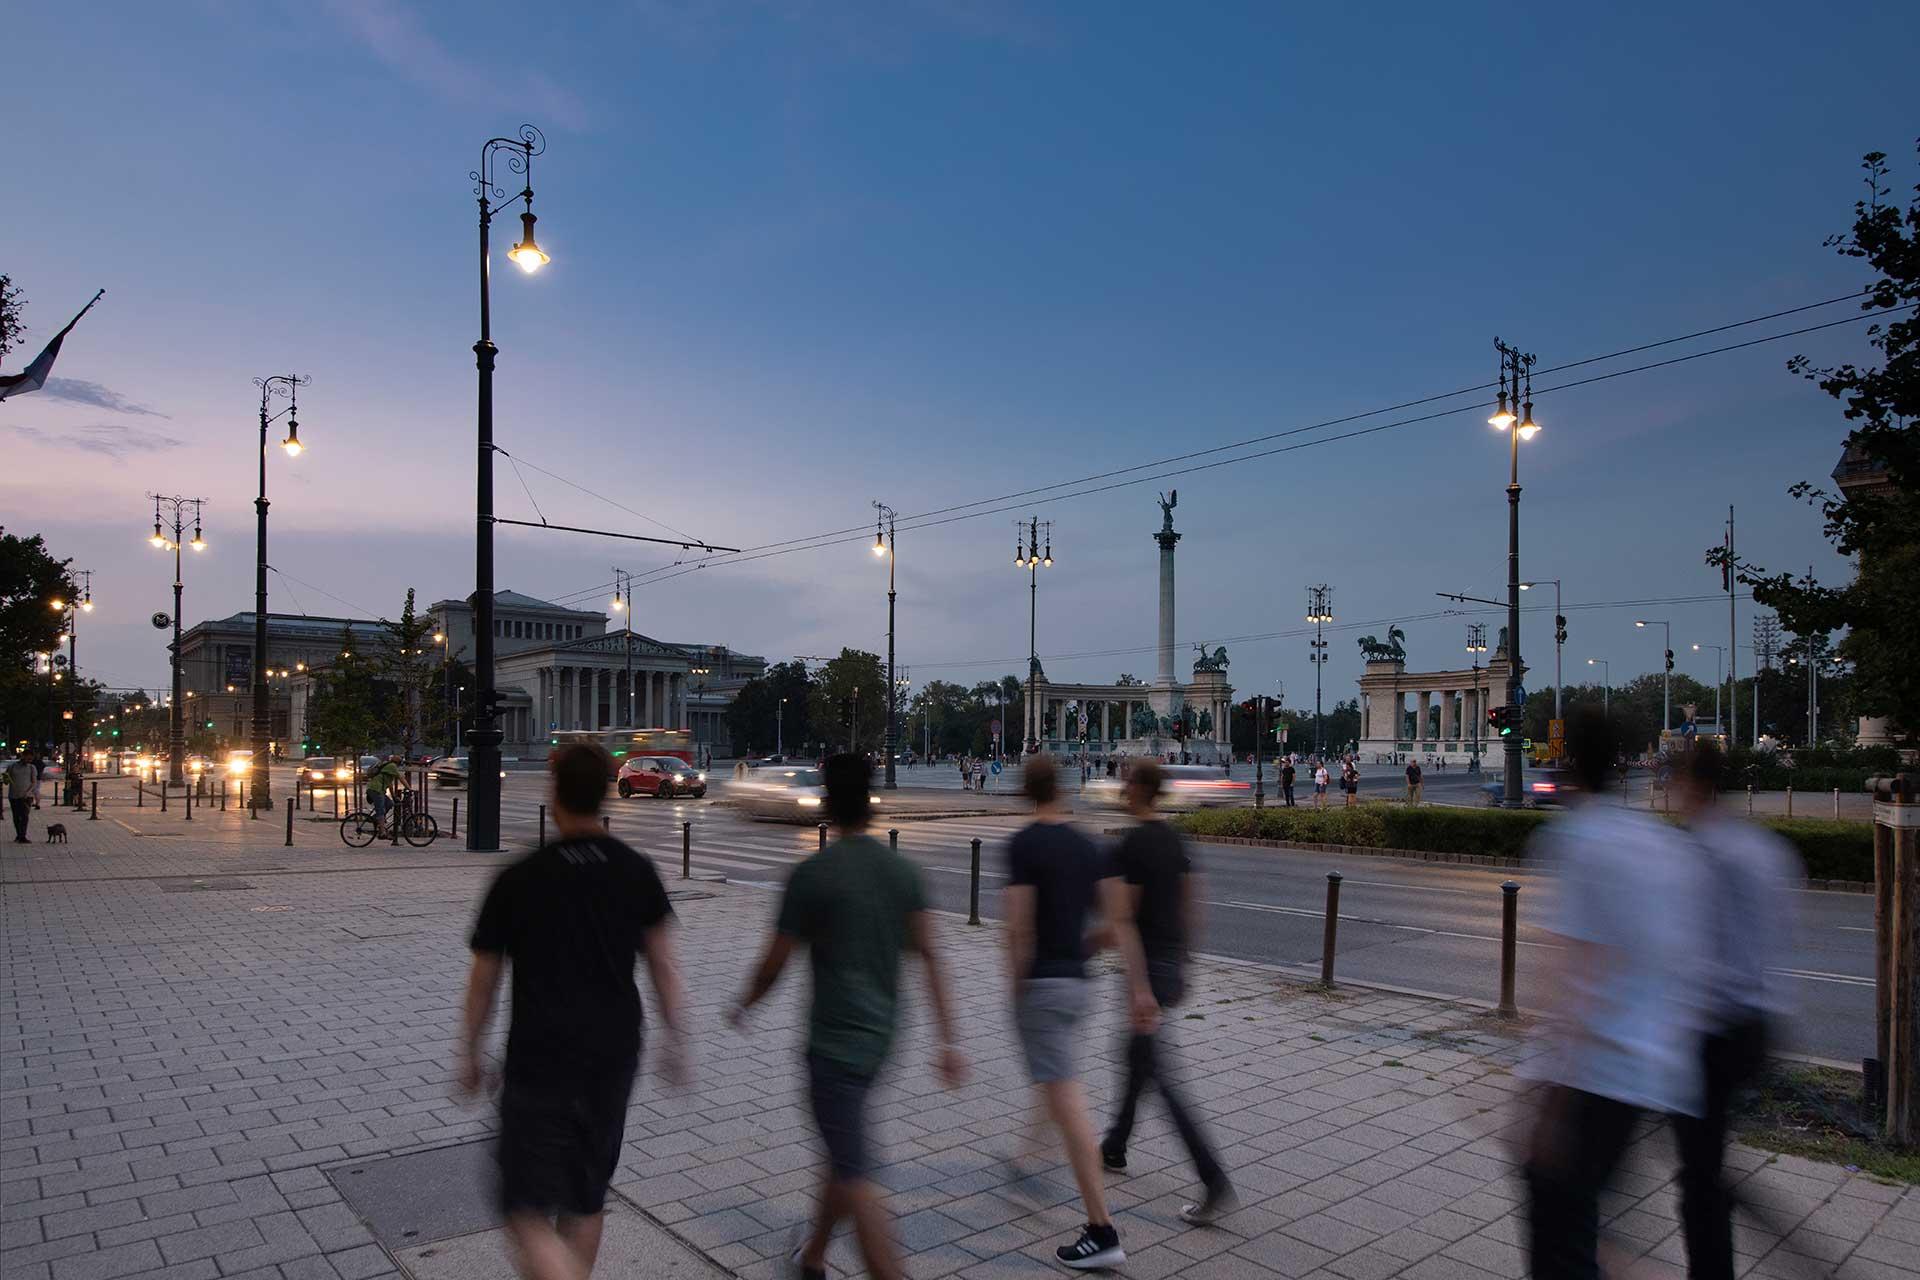 The kandelabra lanterns created by Schréder provide a gentle white light to ensure safety and comfort around Hero Square, one of Budapest's most popular tourist spots